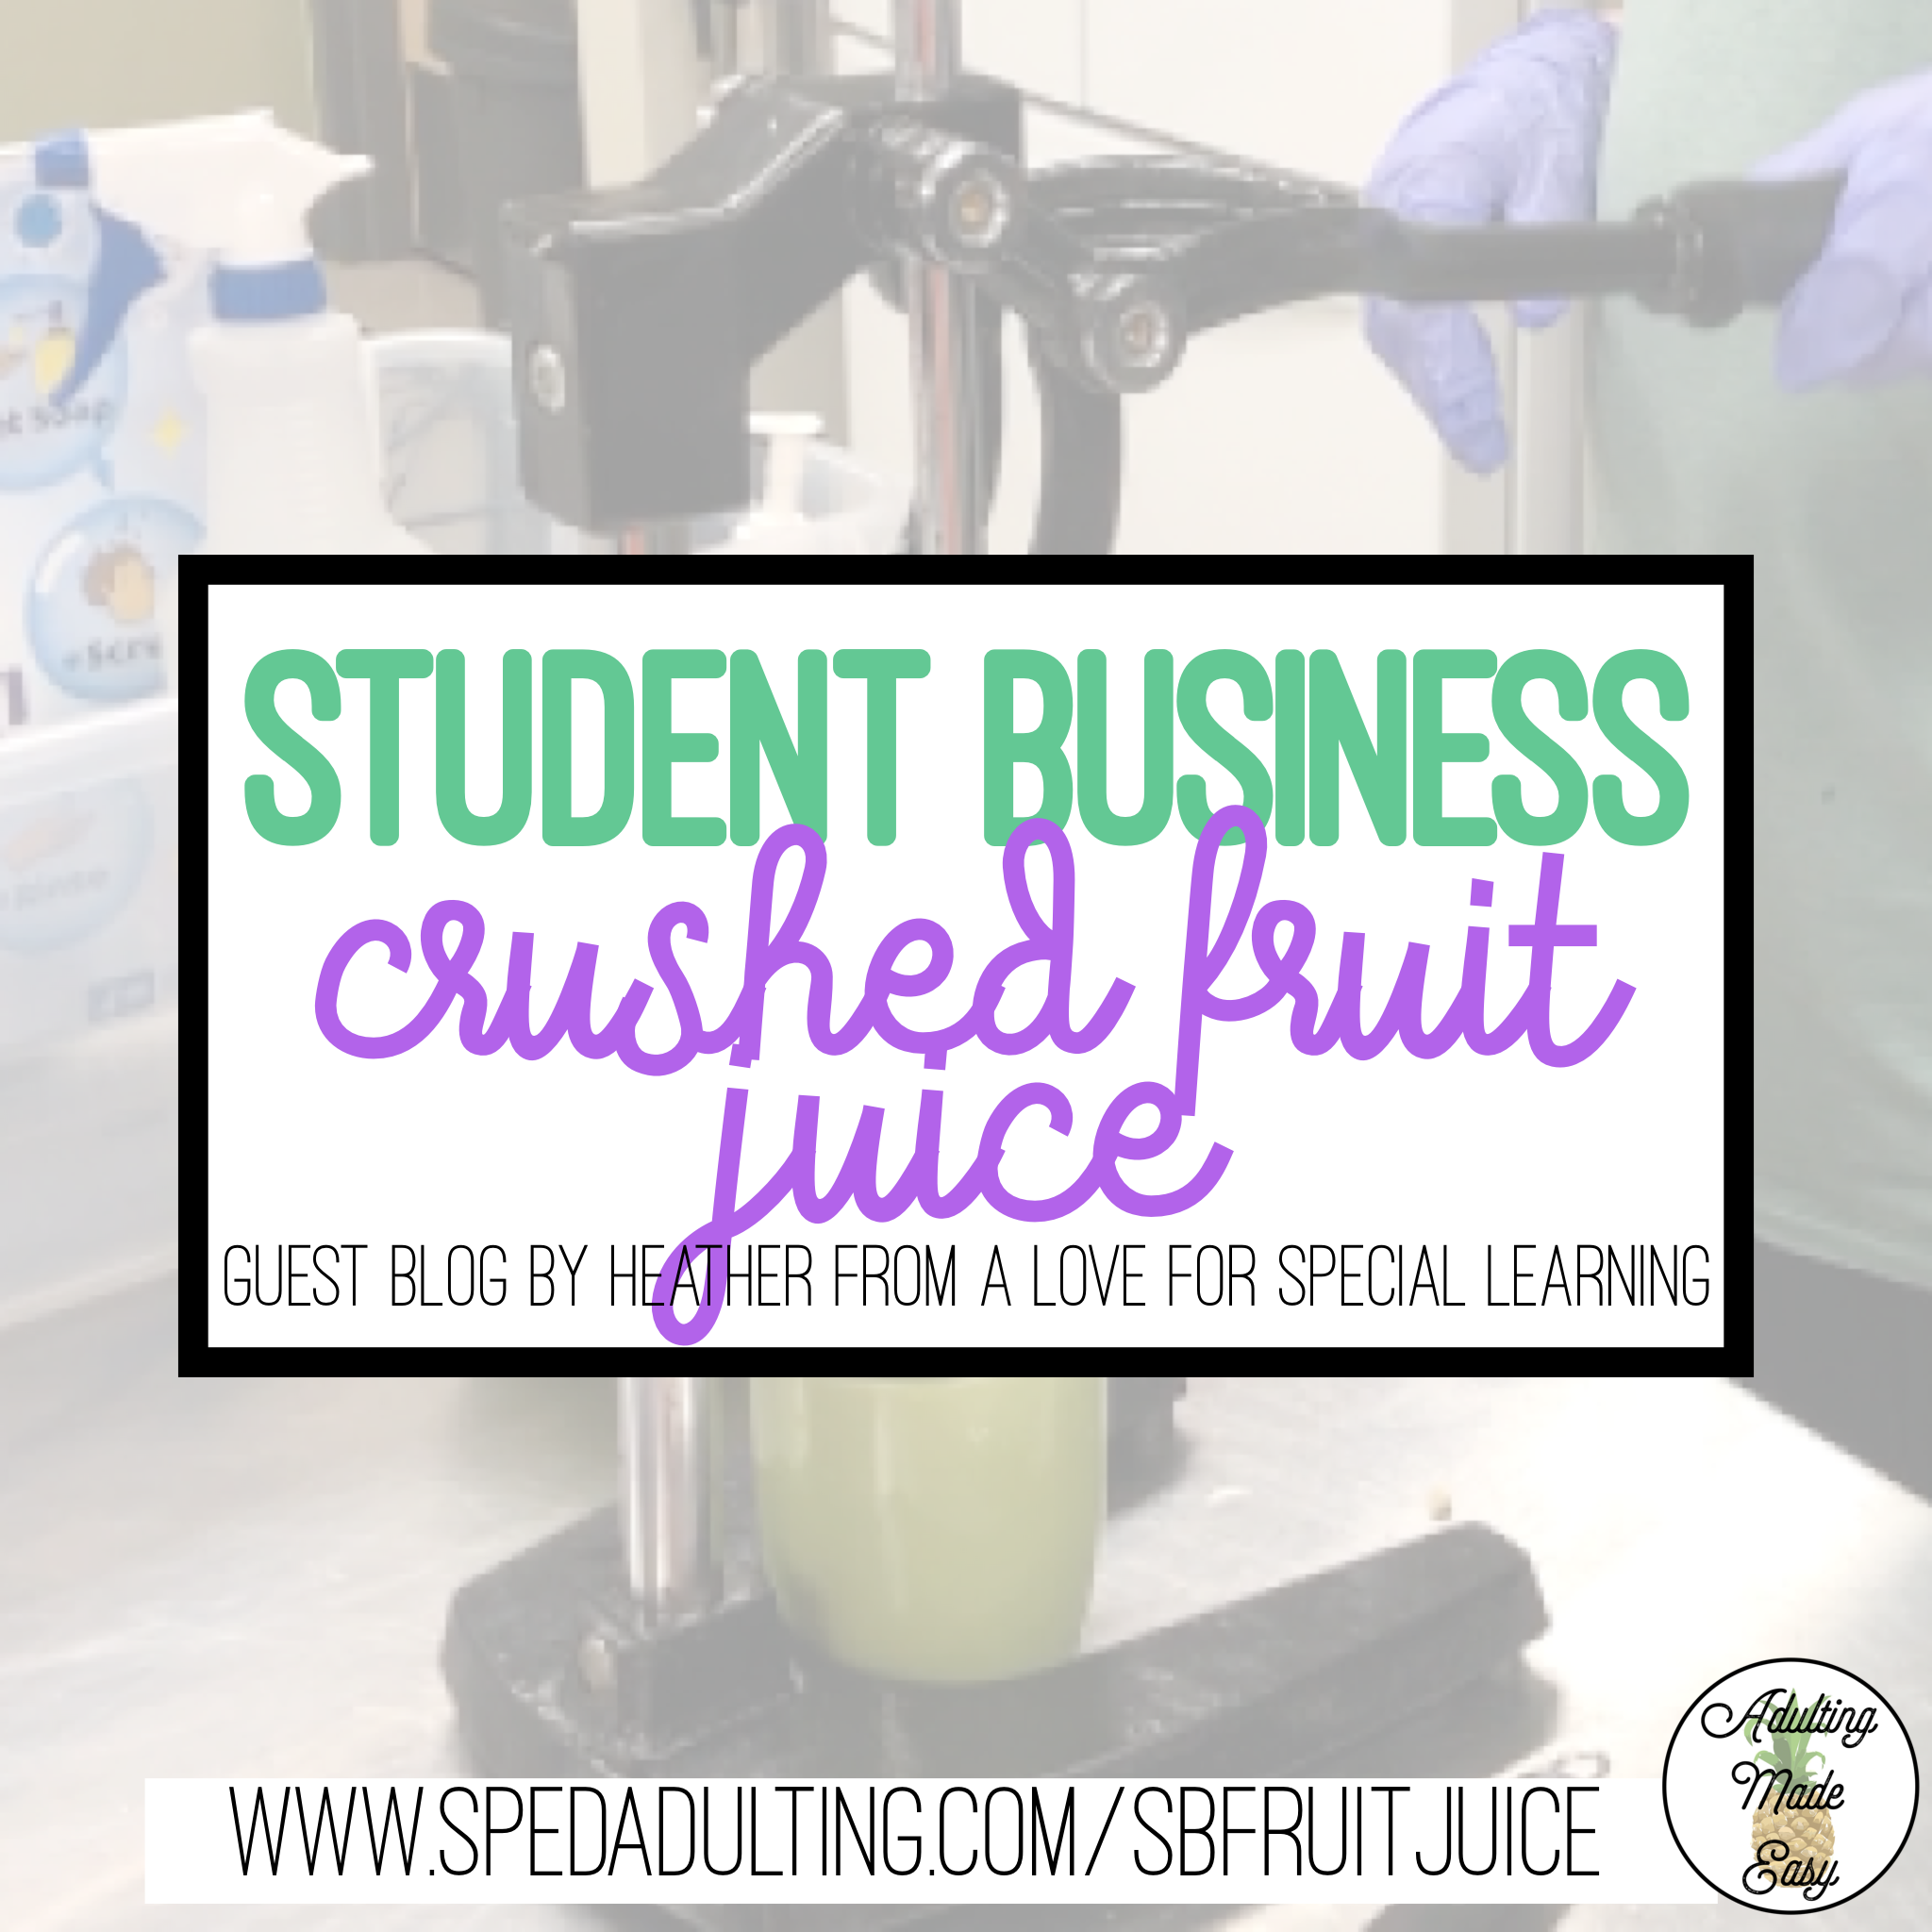 BLOG: Classroom Student Business for Special Education selling fruit crushing juice